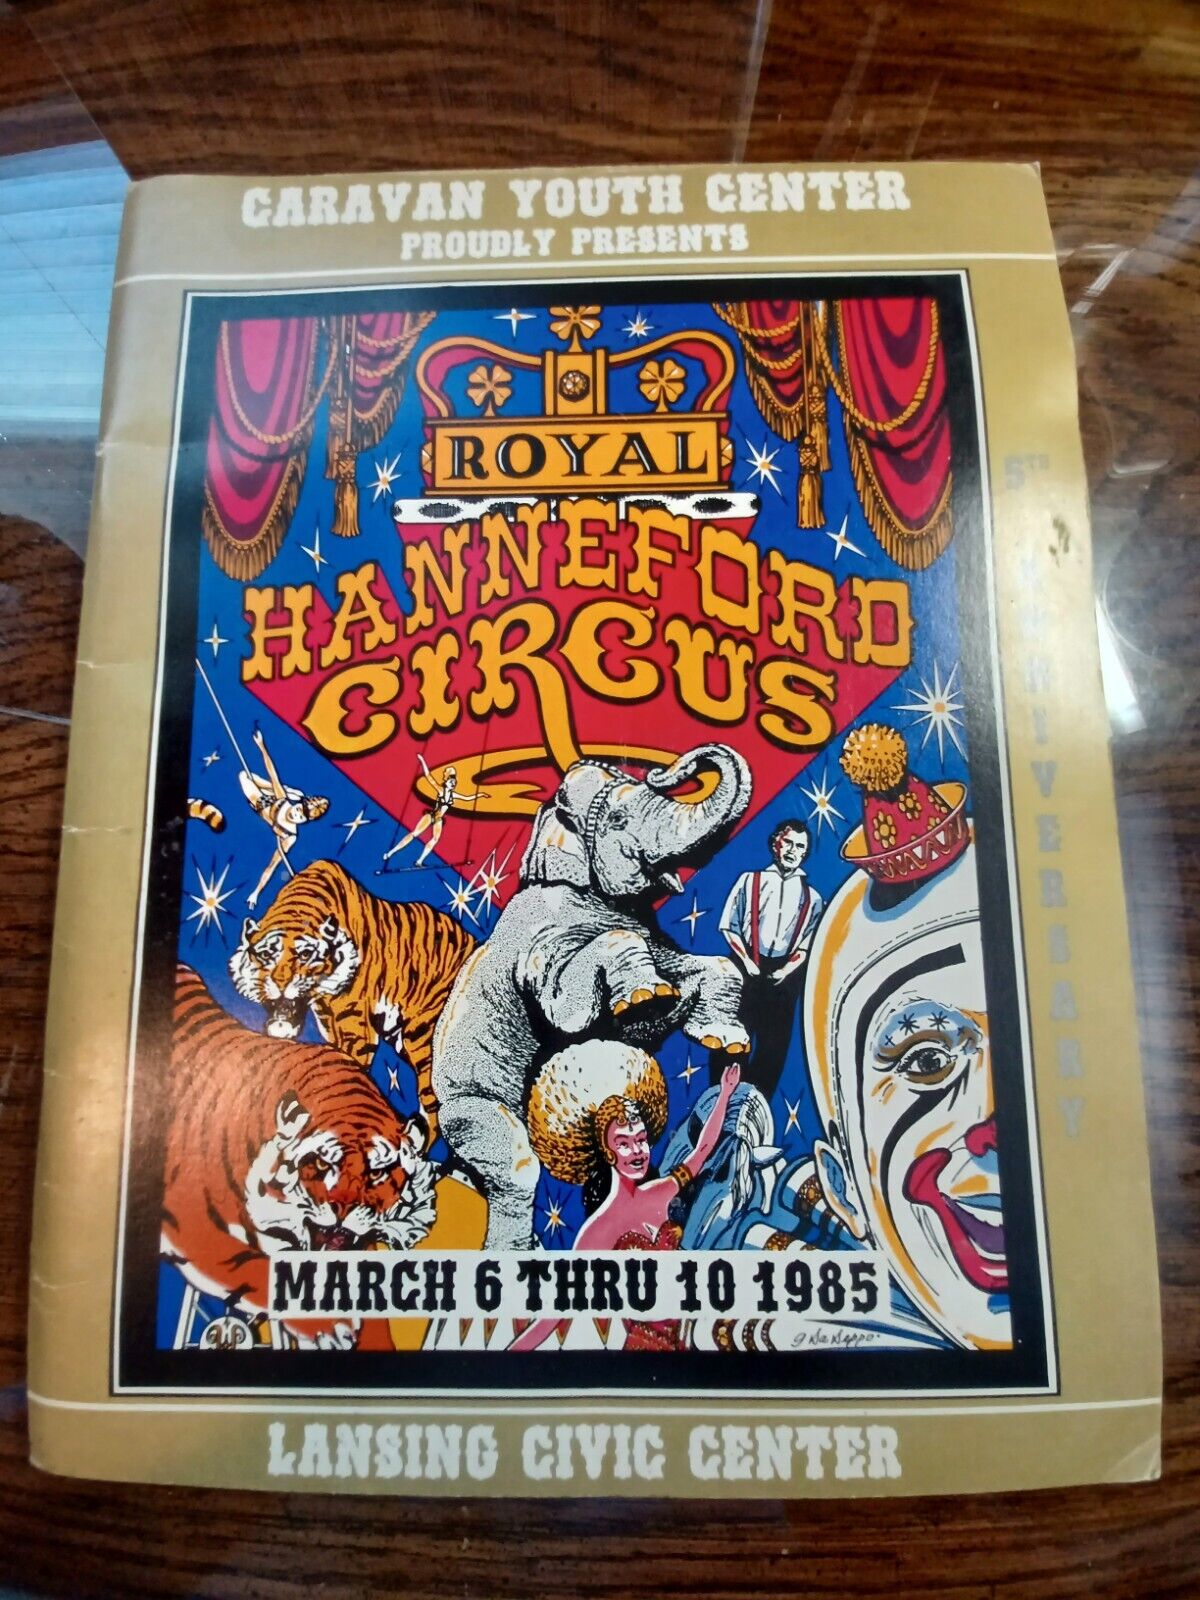 Caravan Youth Center - Royal Hanneford Circus Coloring Book and Program 1985